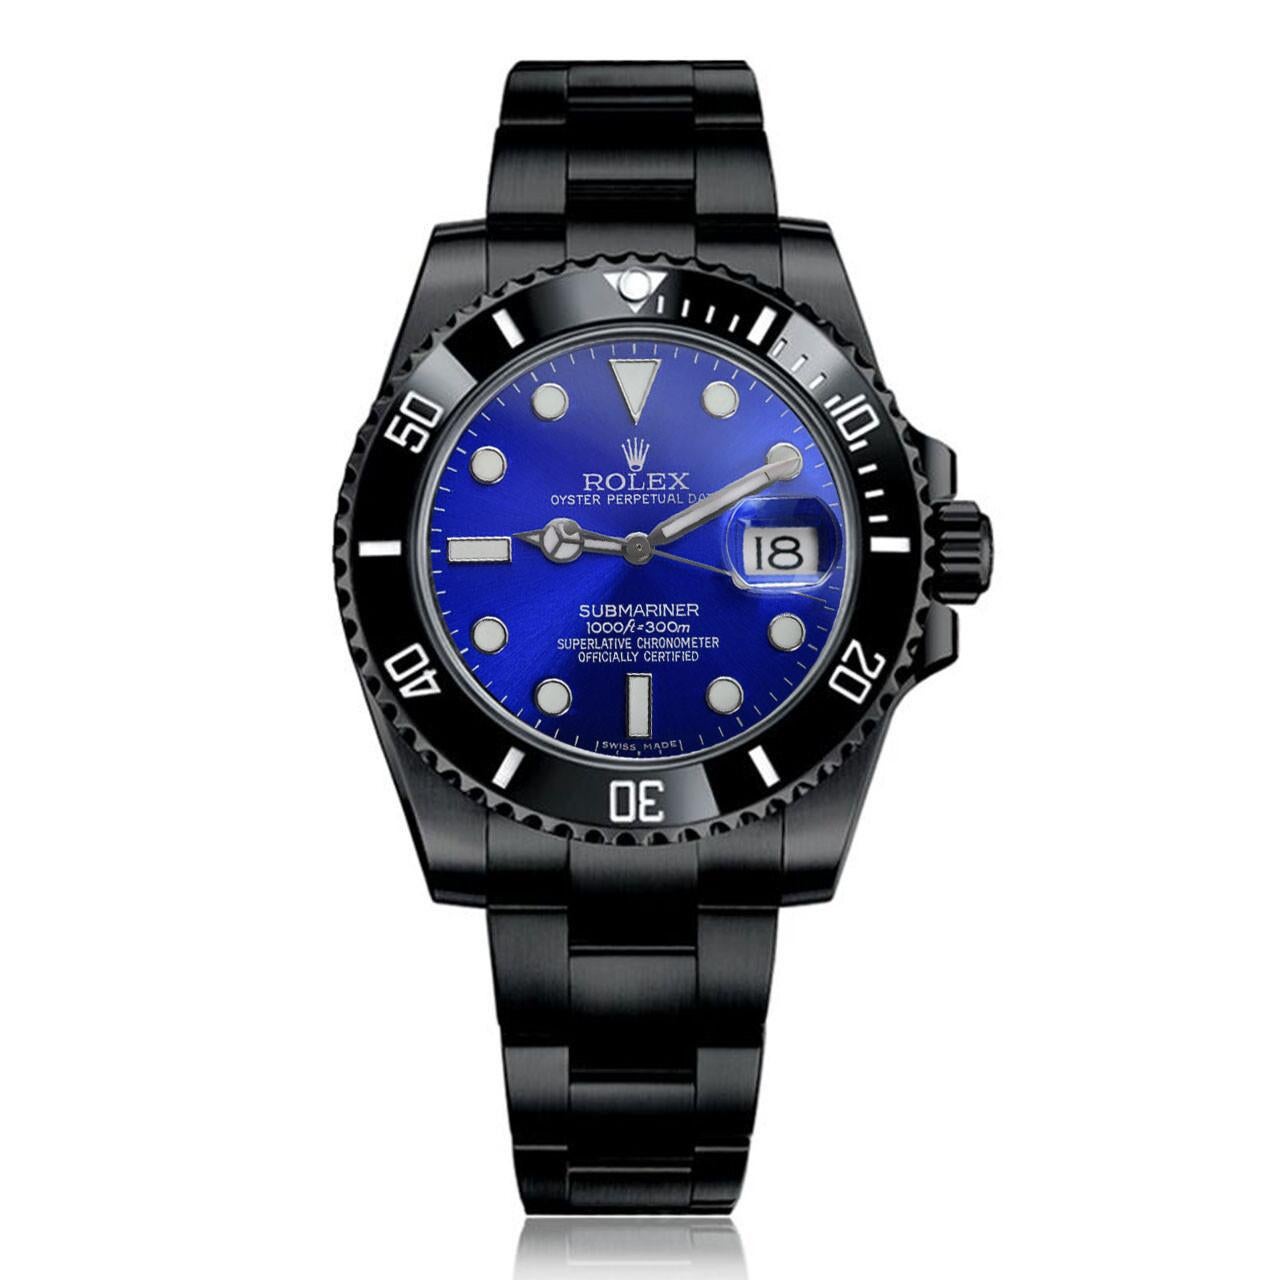 Rolex Submariner Date Blue Dial Black PVD/DLC Stainless Steel Watch 116610LN

Please note: This is never worn genuine Rolex watch that has been customized with black coating and blue dial aftermarket. 